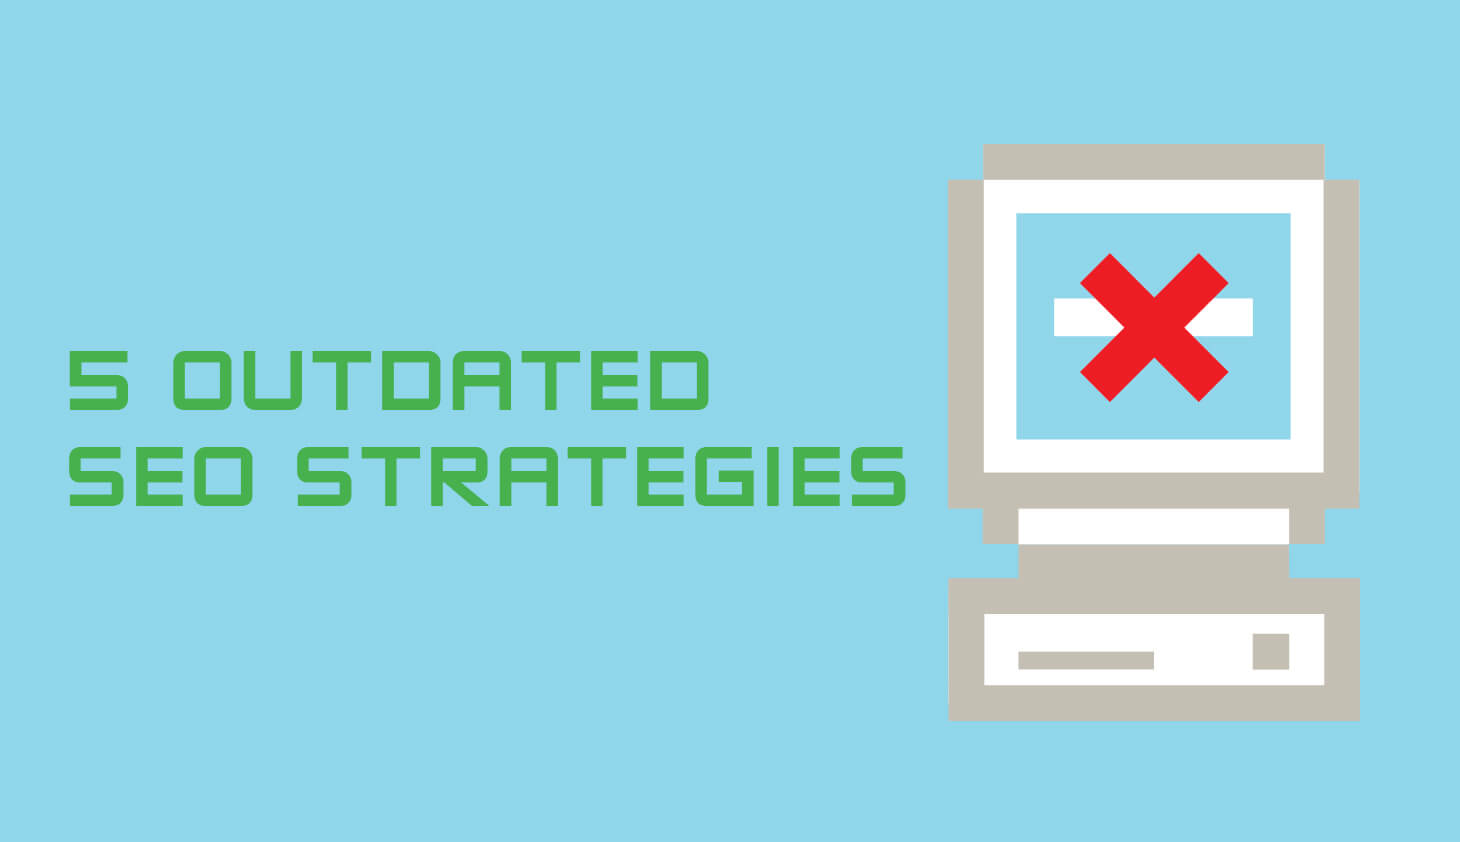 Outdated SEO strategies